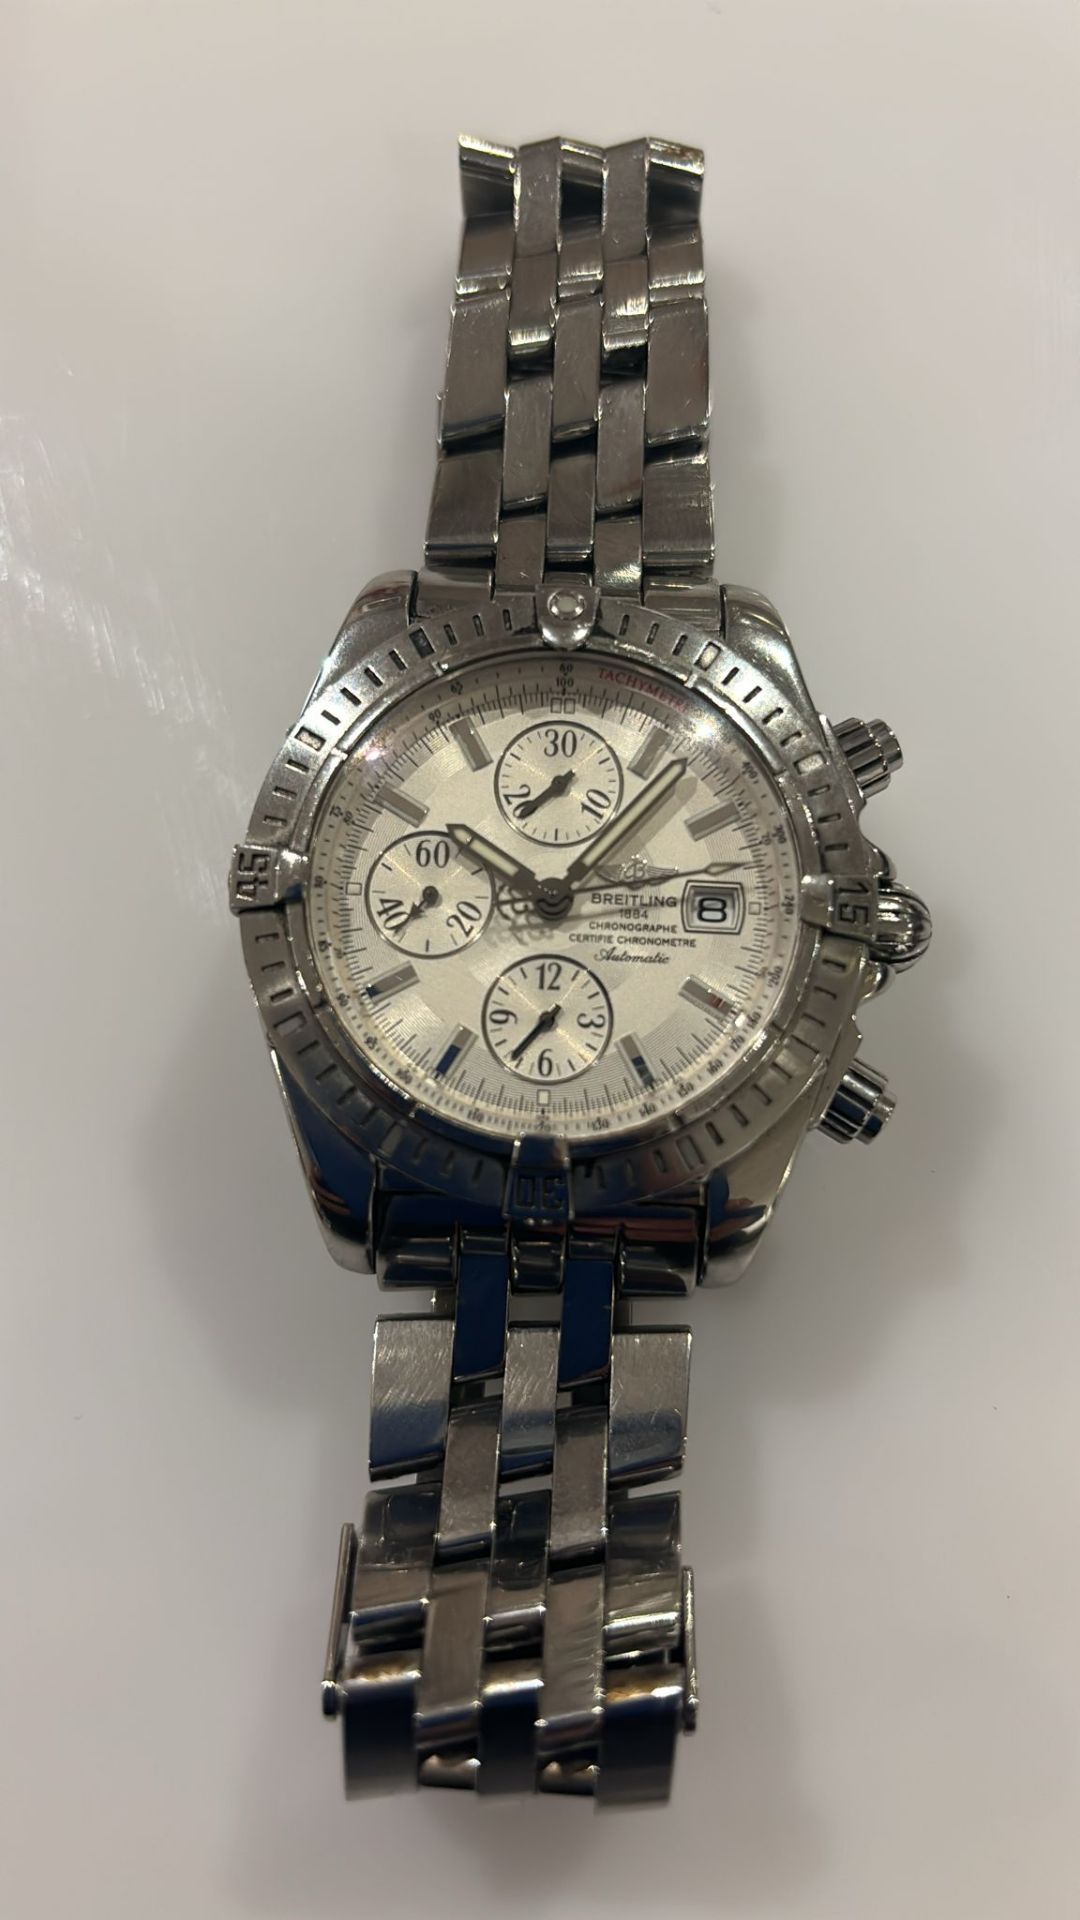 Breitling Chronomat Evolution A13356 Watch - Image 2 of 12